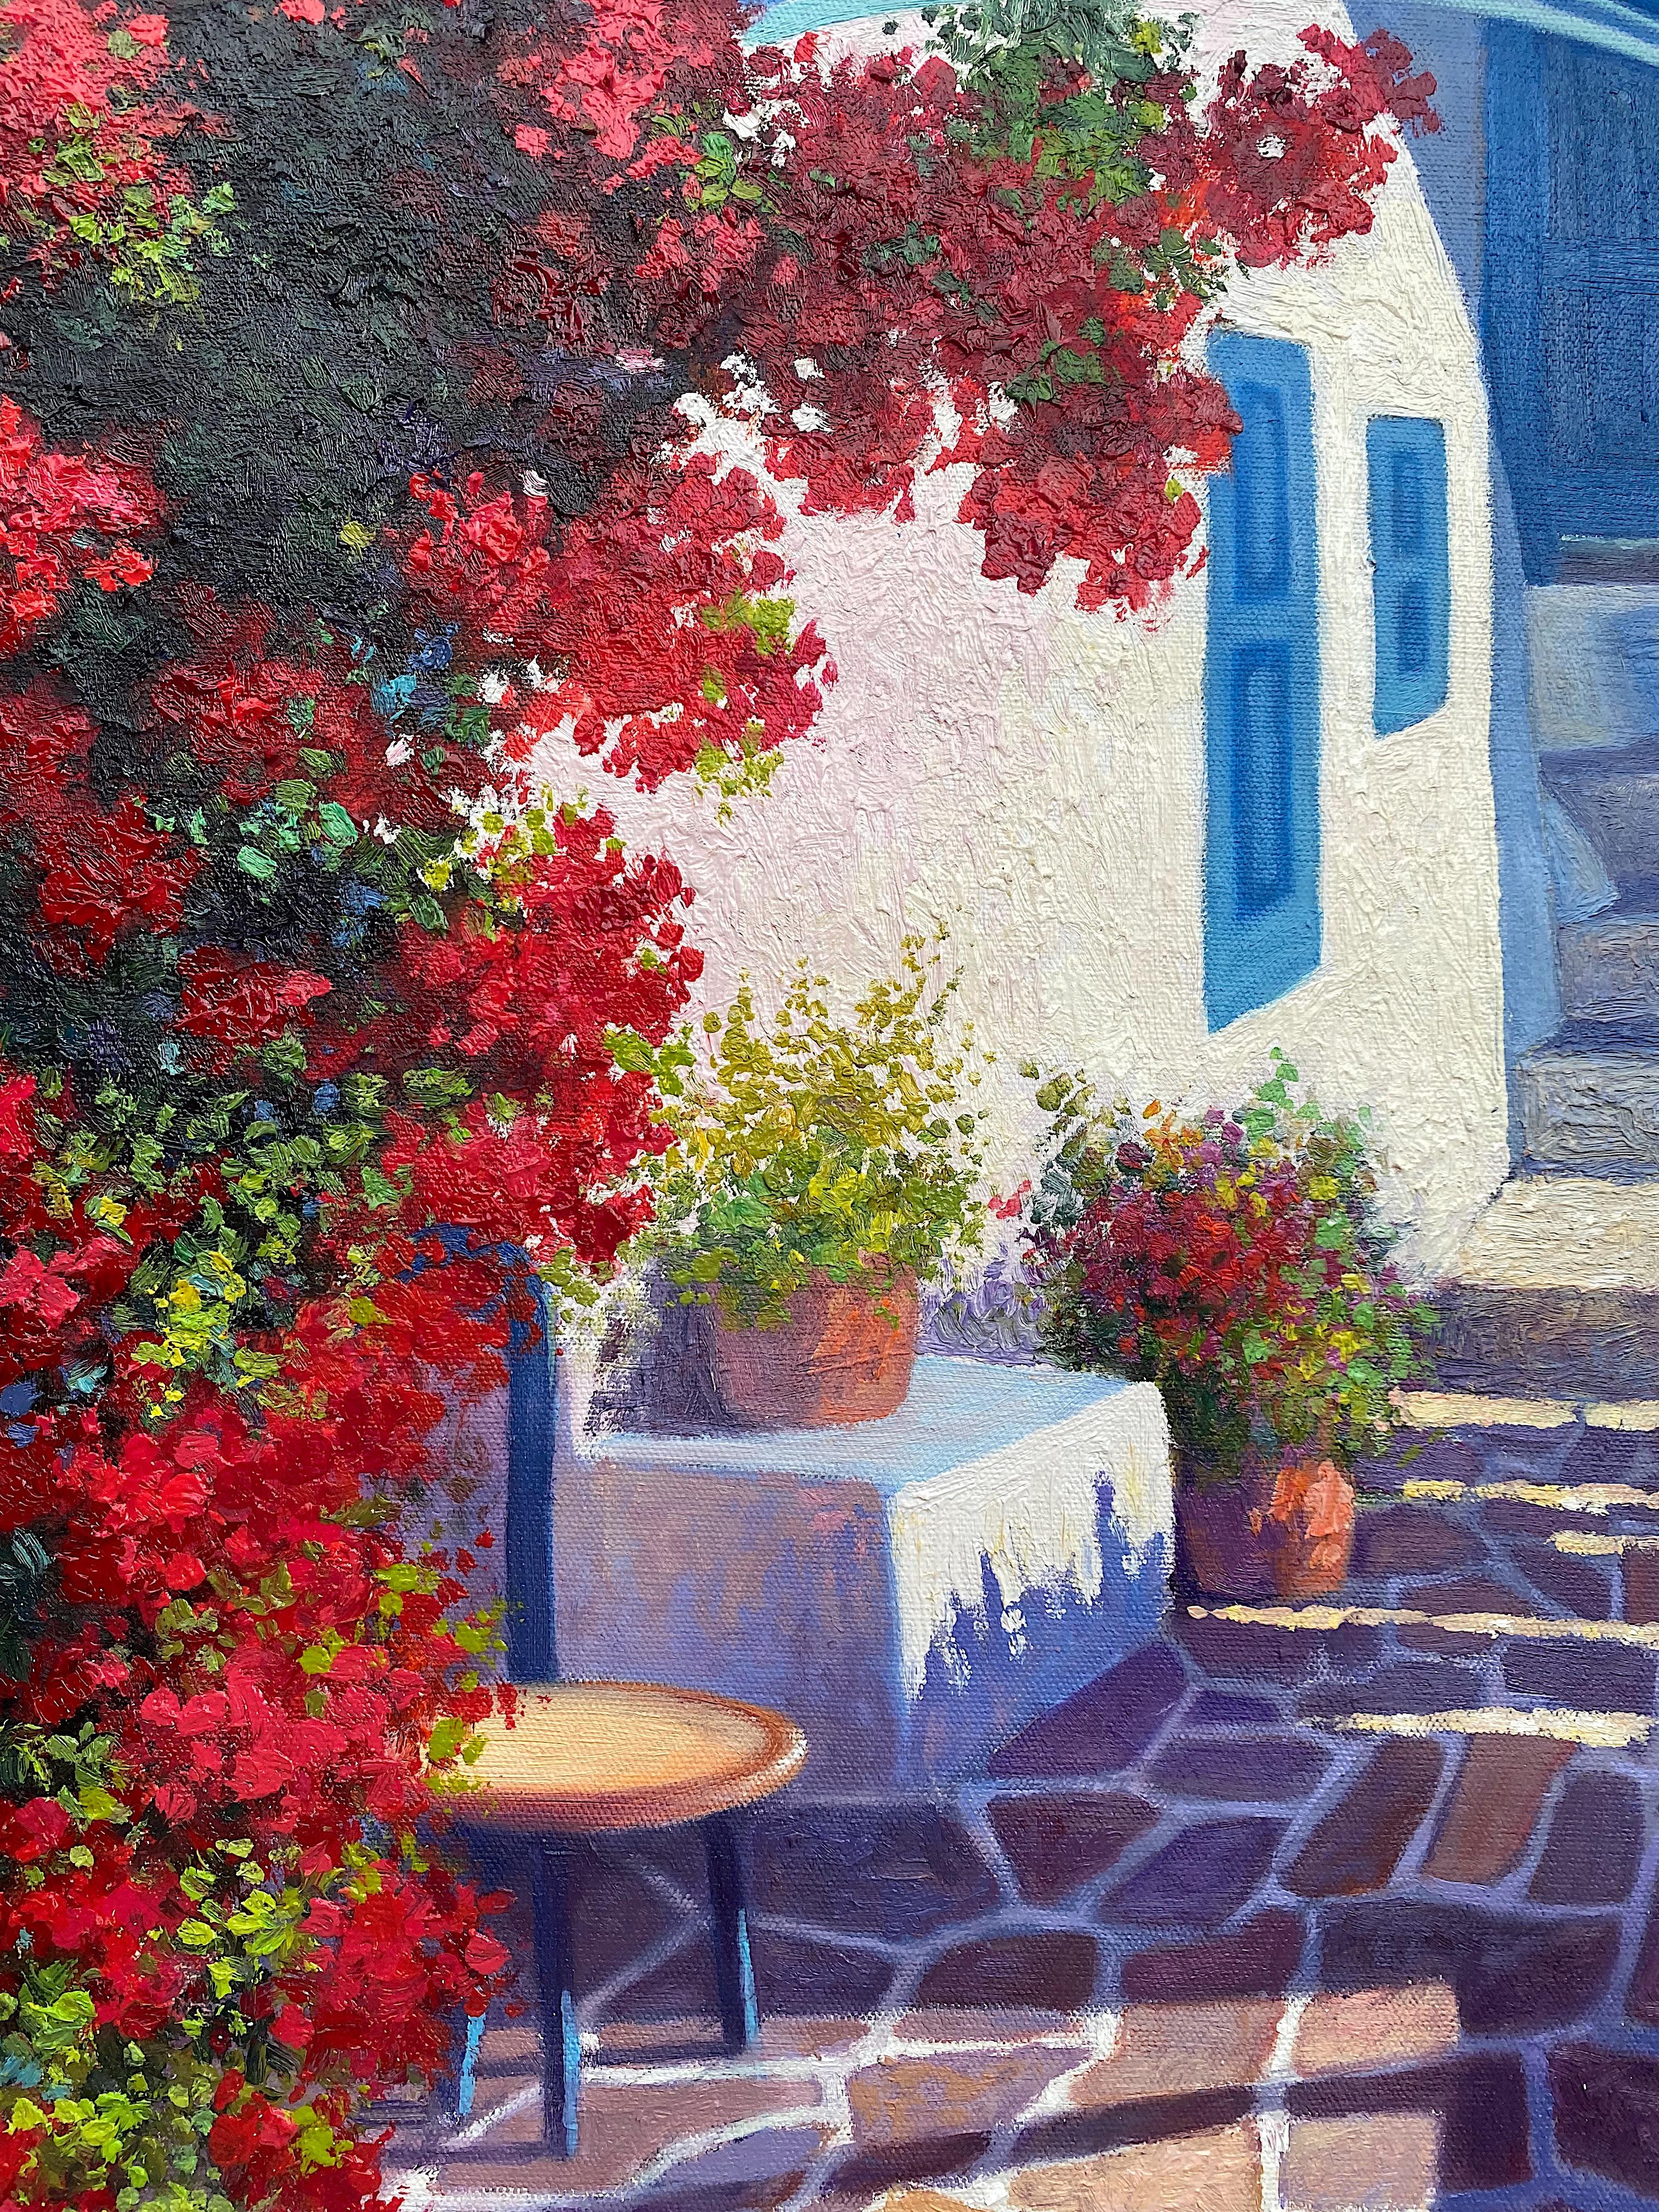 Sunny day in Greece with bougainvilleas - Original oil painting - Impressionist - Gray Landscape Painting by Sonco Carrasco